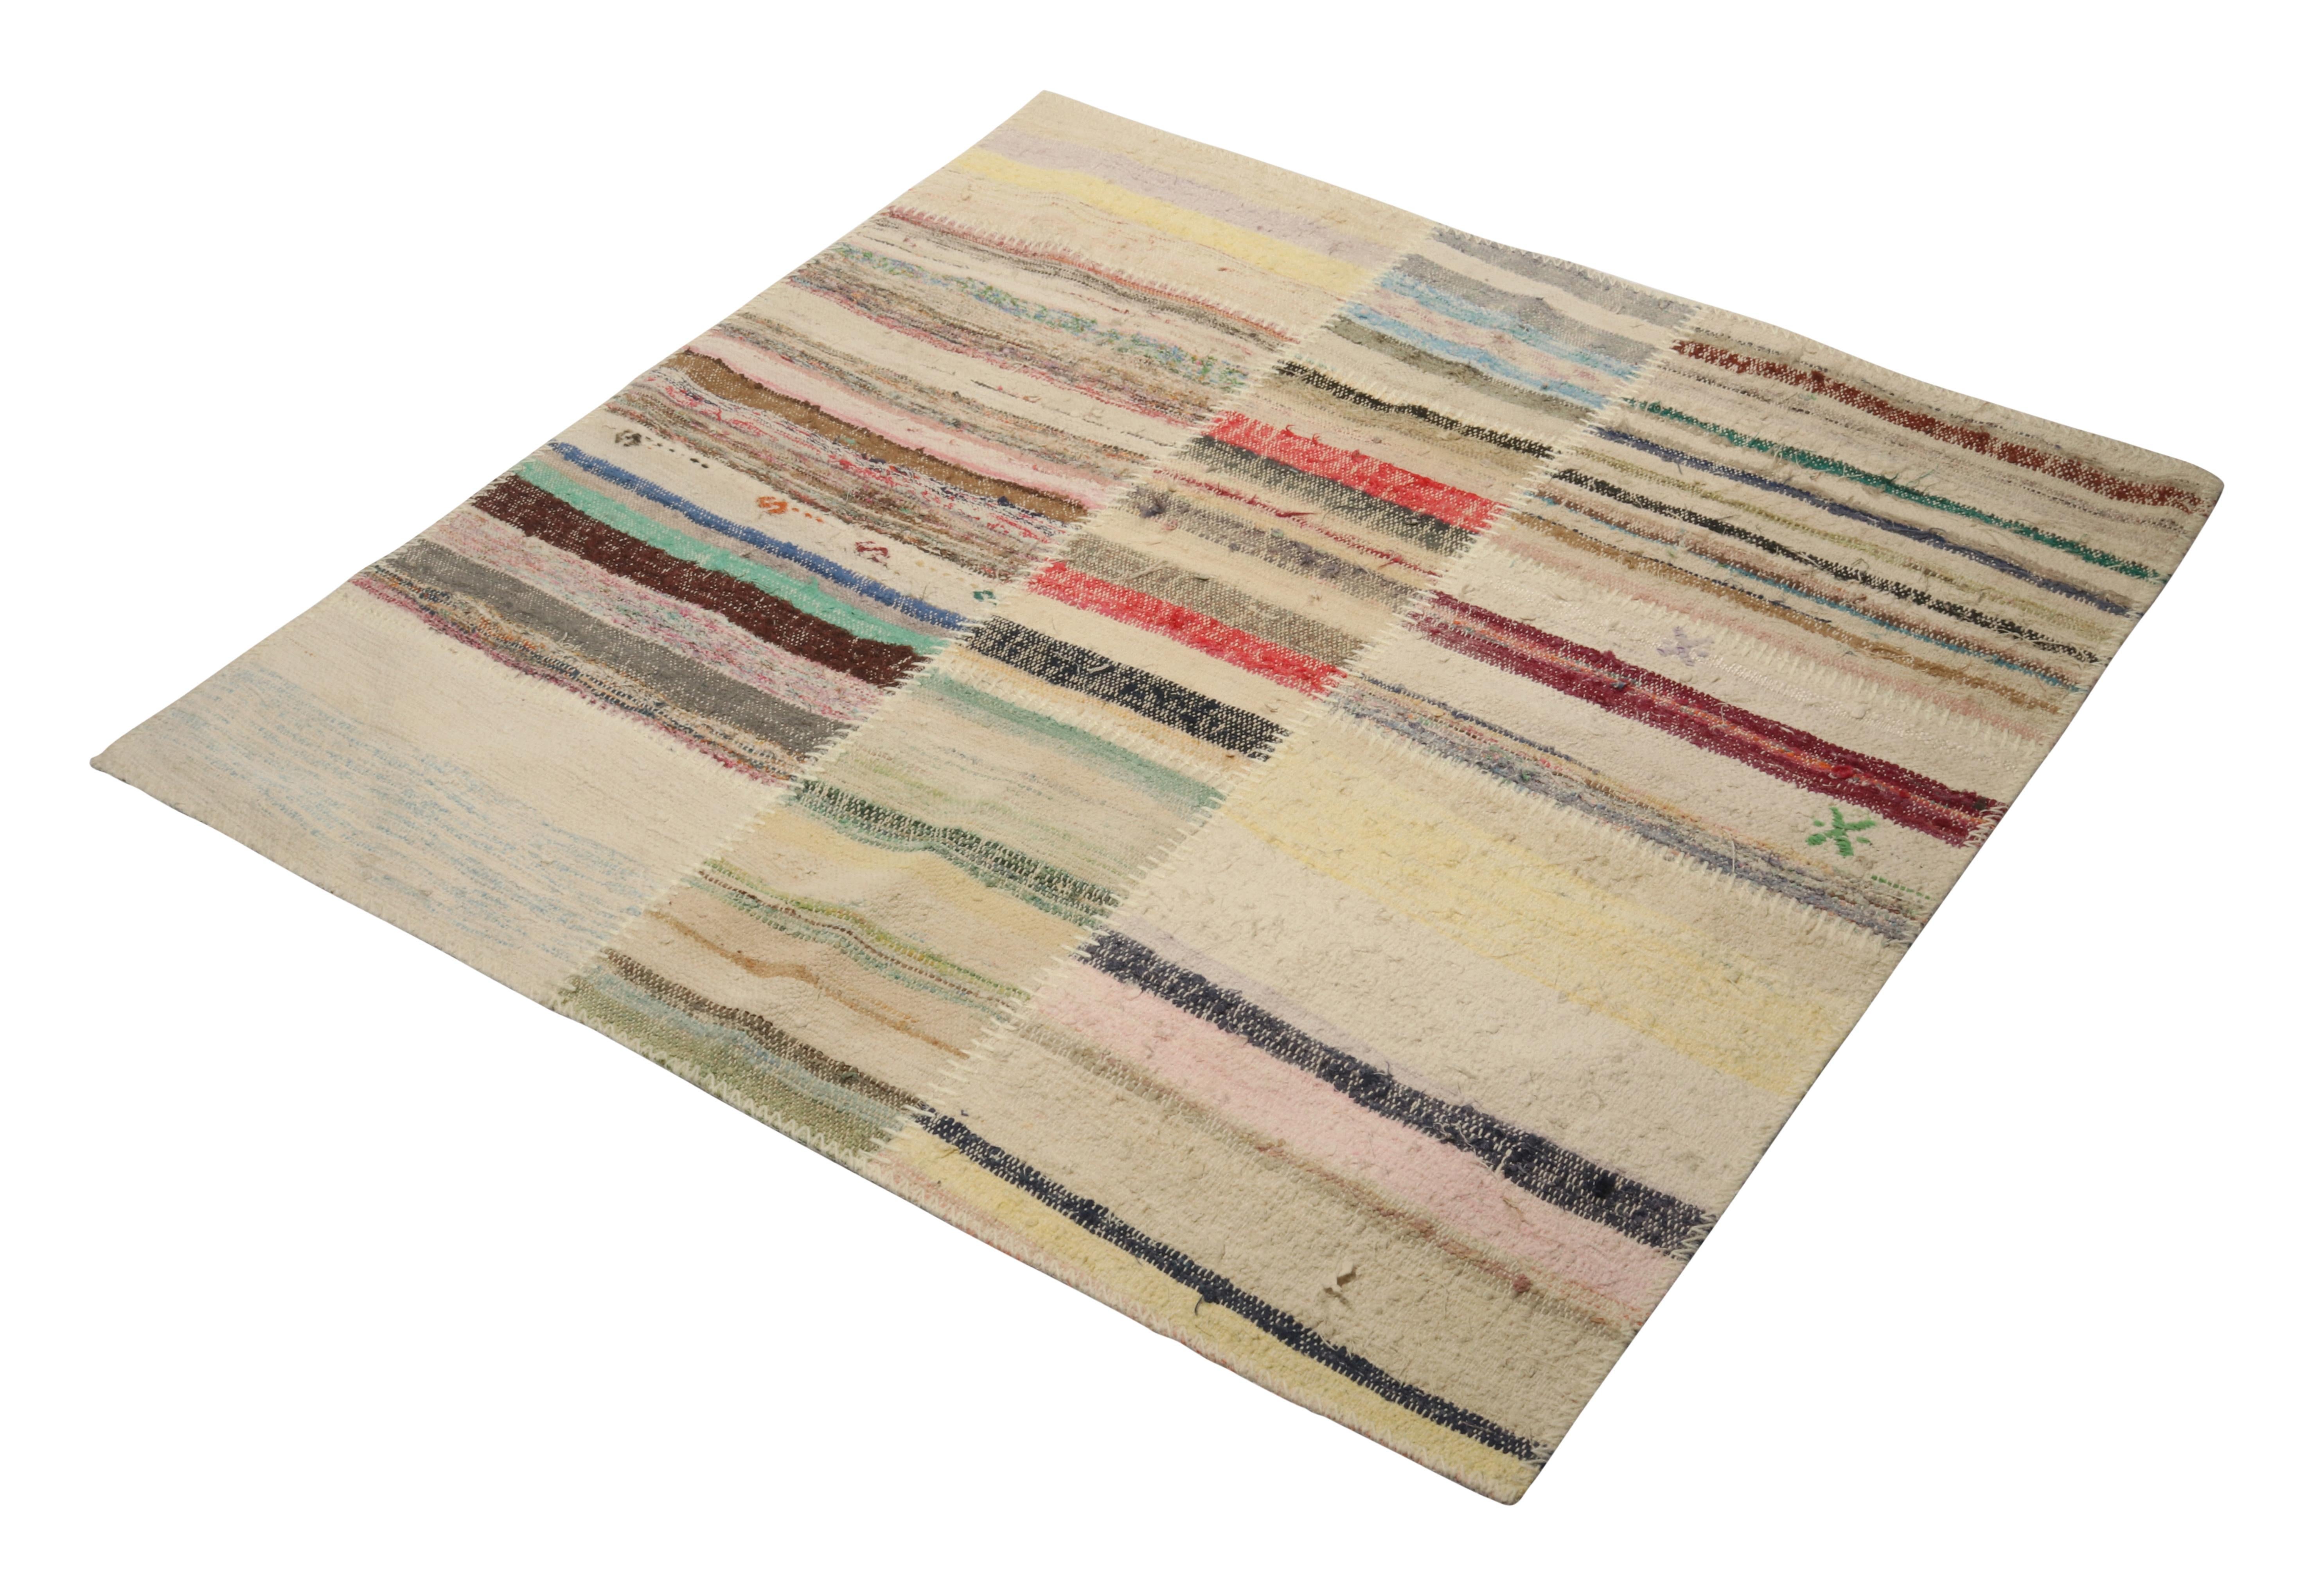 Handwoven in wool, Rug & Kilim presents a 4x4 square rug from their innovative new patchwork kilim collection. 

On the Design: 

This flat weave technique repurposes vintage yarns in polychromatic stripes and striae, achieving a playful look